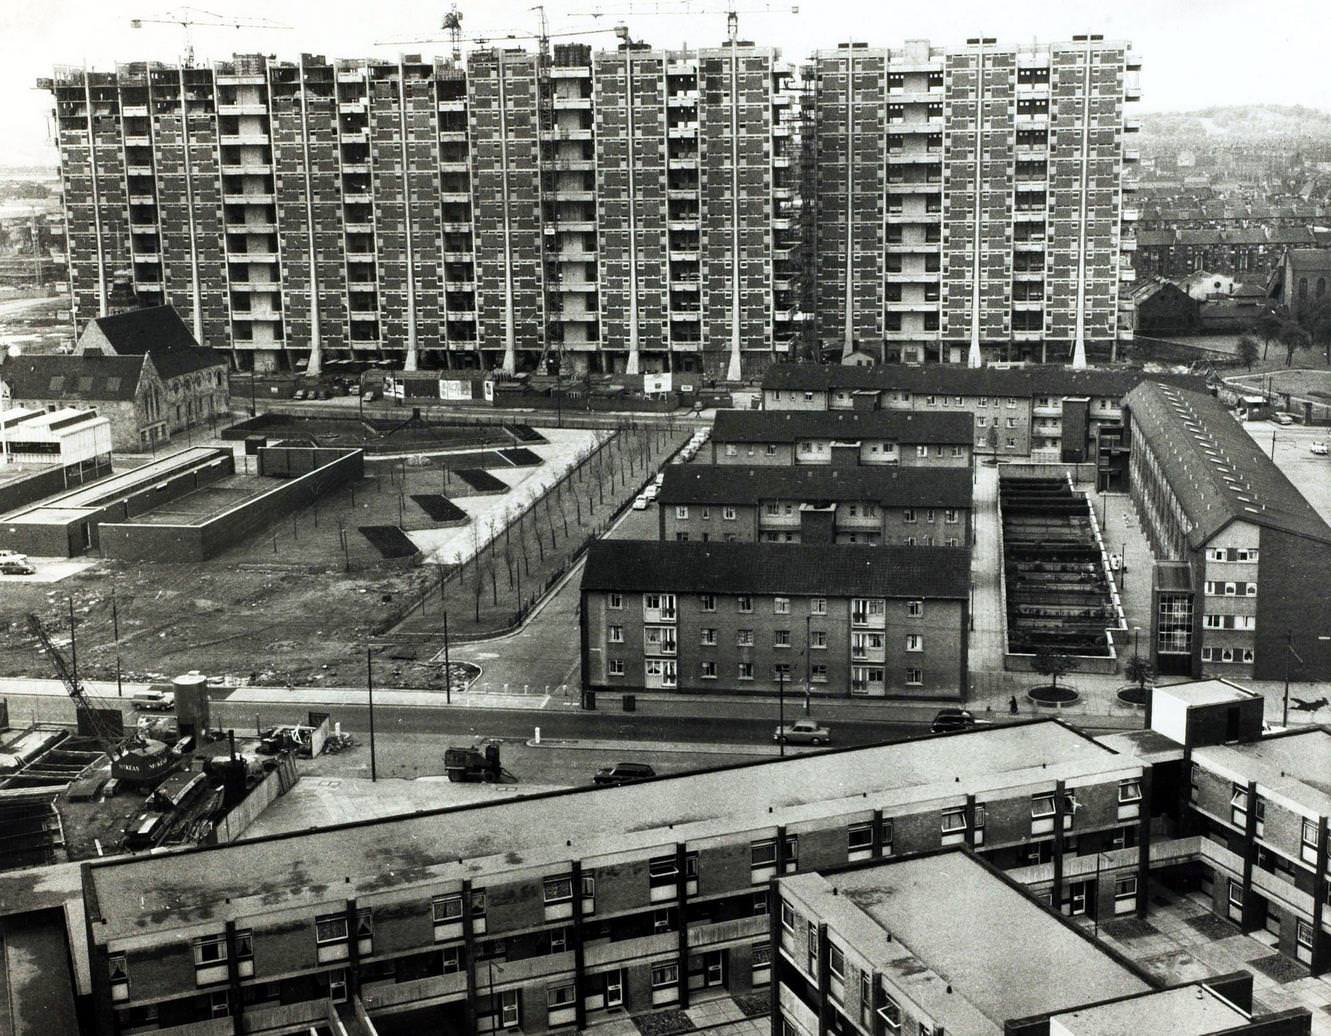 A view of the new Gorbals flats, in Glasgow, Scotland, 1964